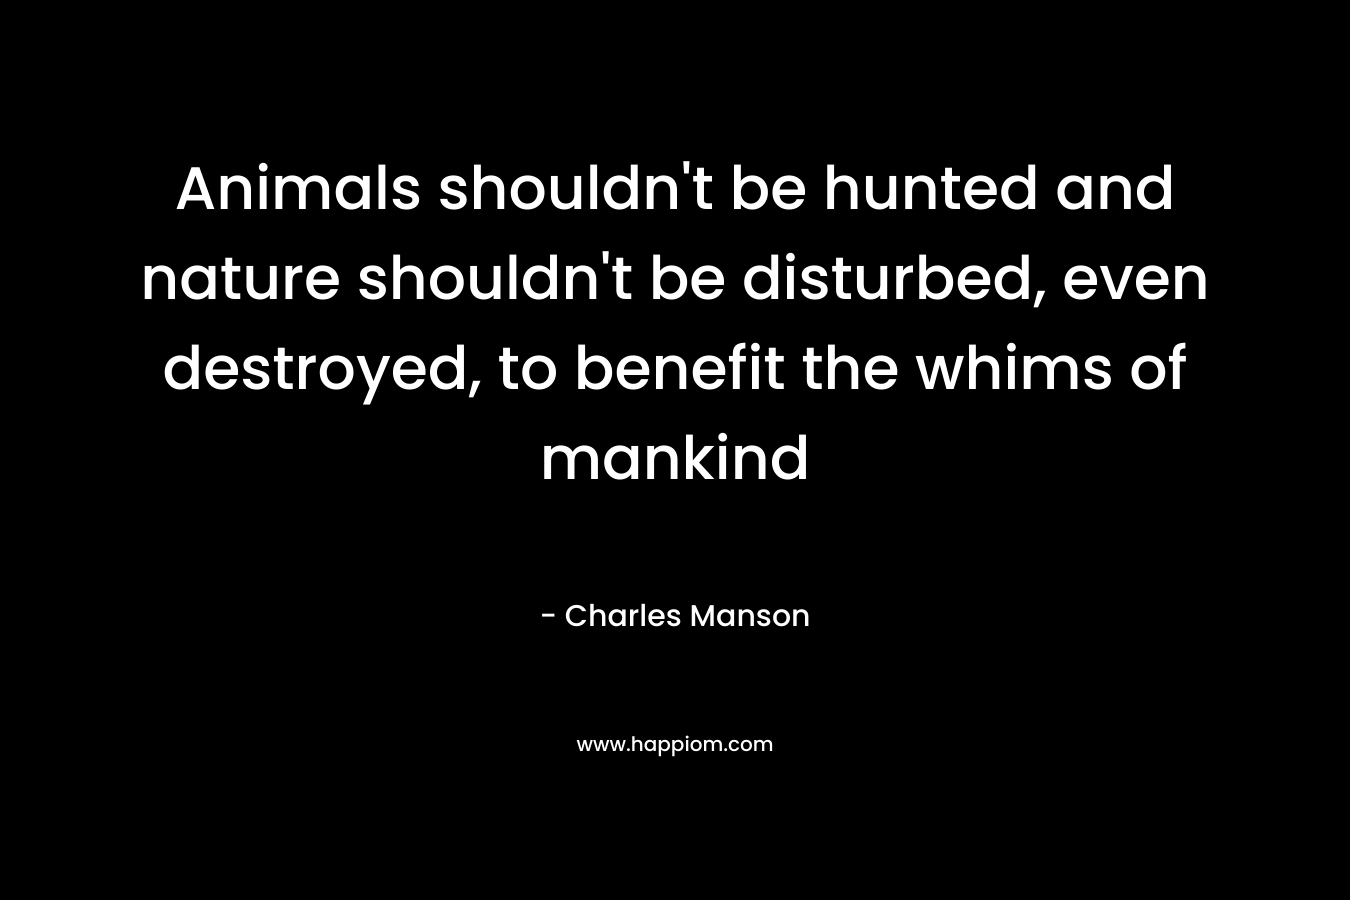 Animals shouldn't be hunted and nature shouldn't be disturbed, even destroyed, to benefit the whims of mankind